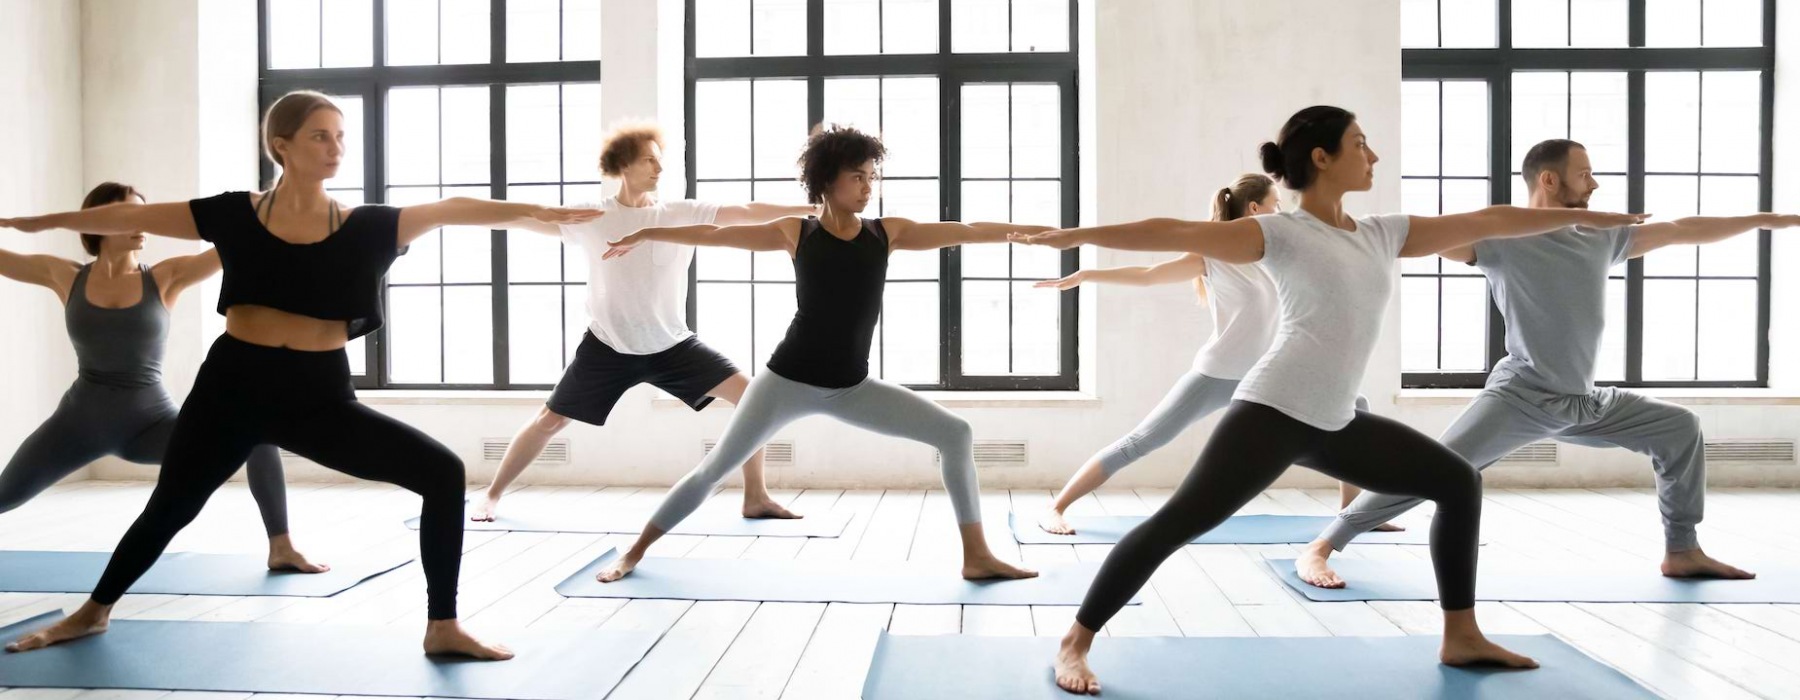 Group of women doing yoga exercise in a yoga studio in Pensacola